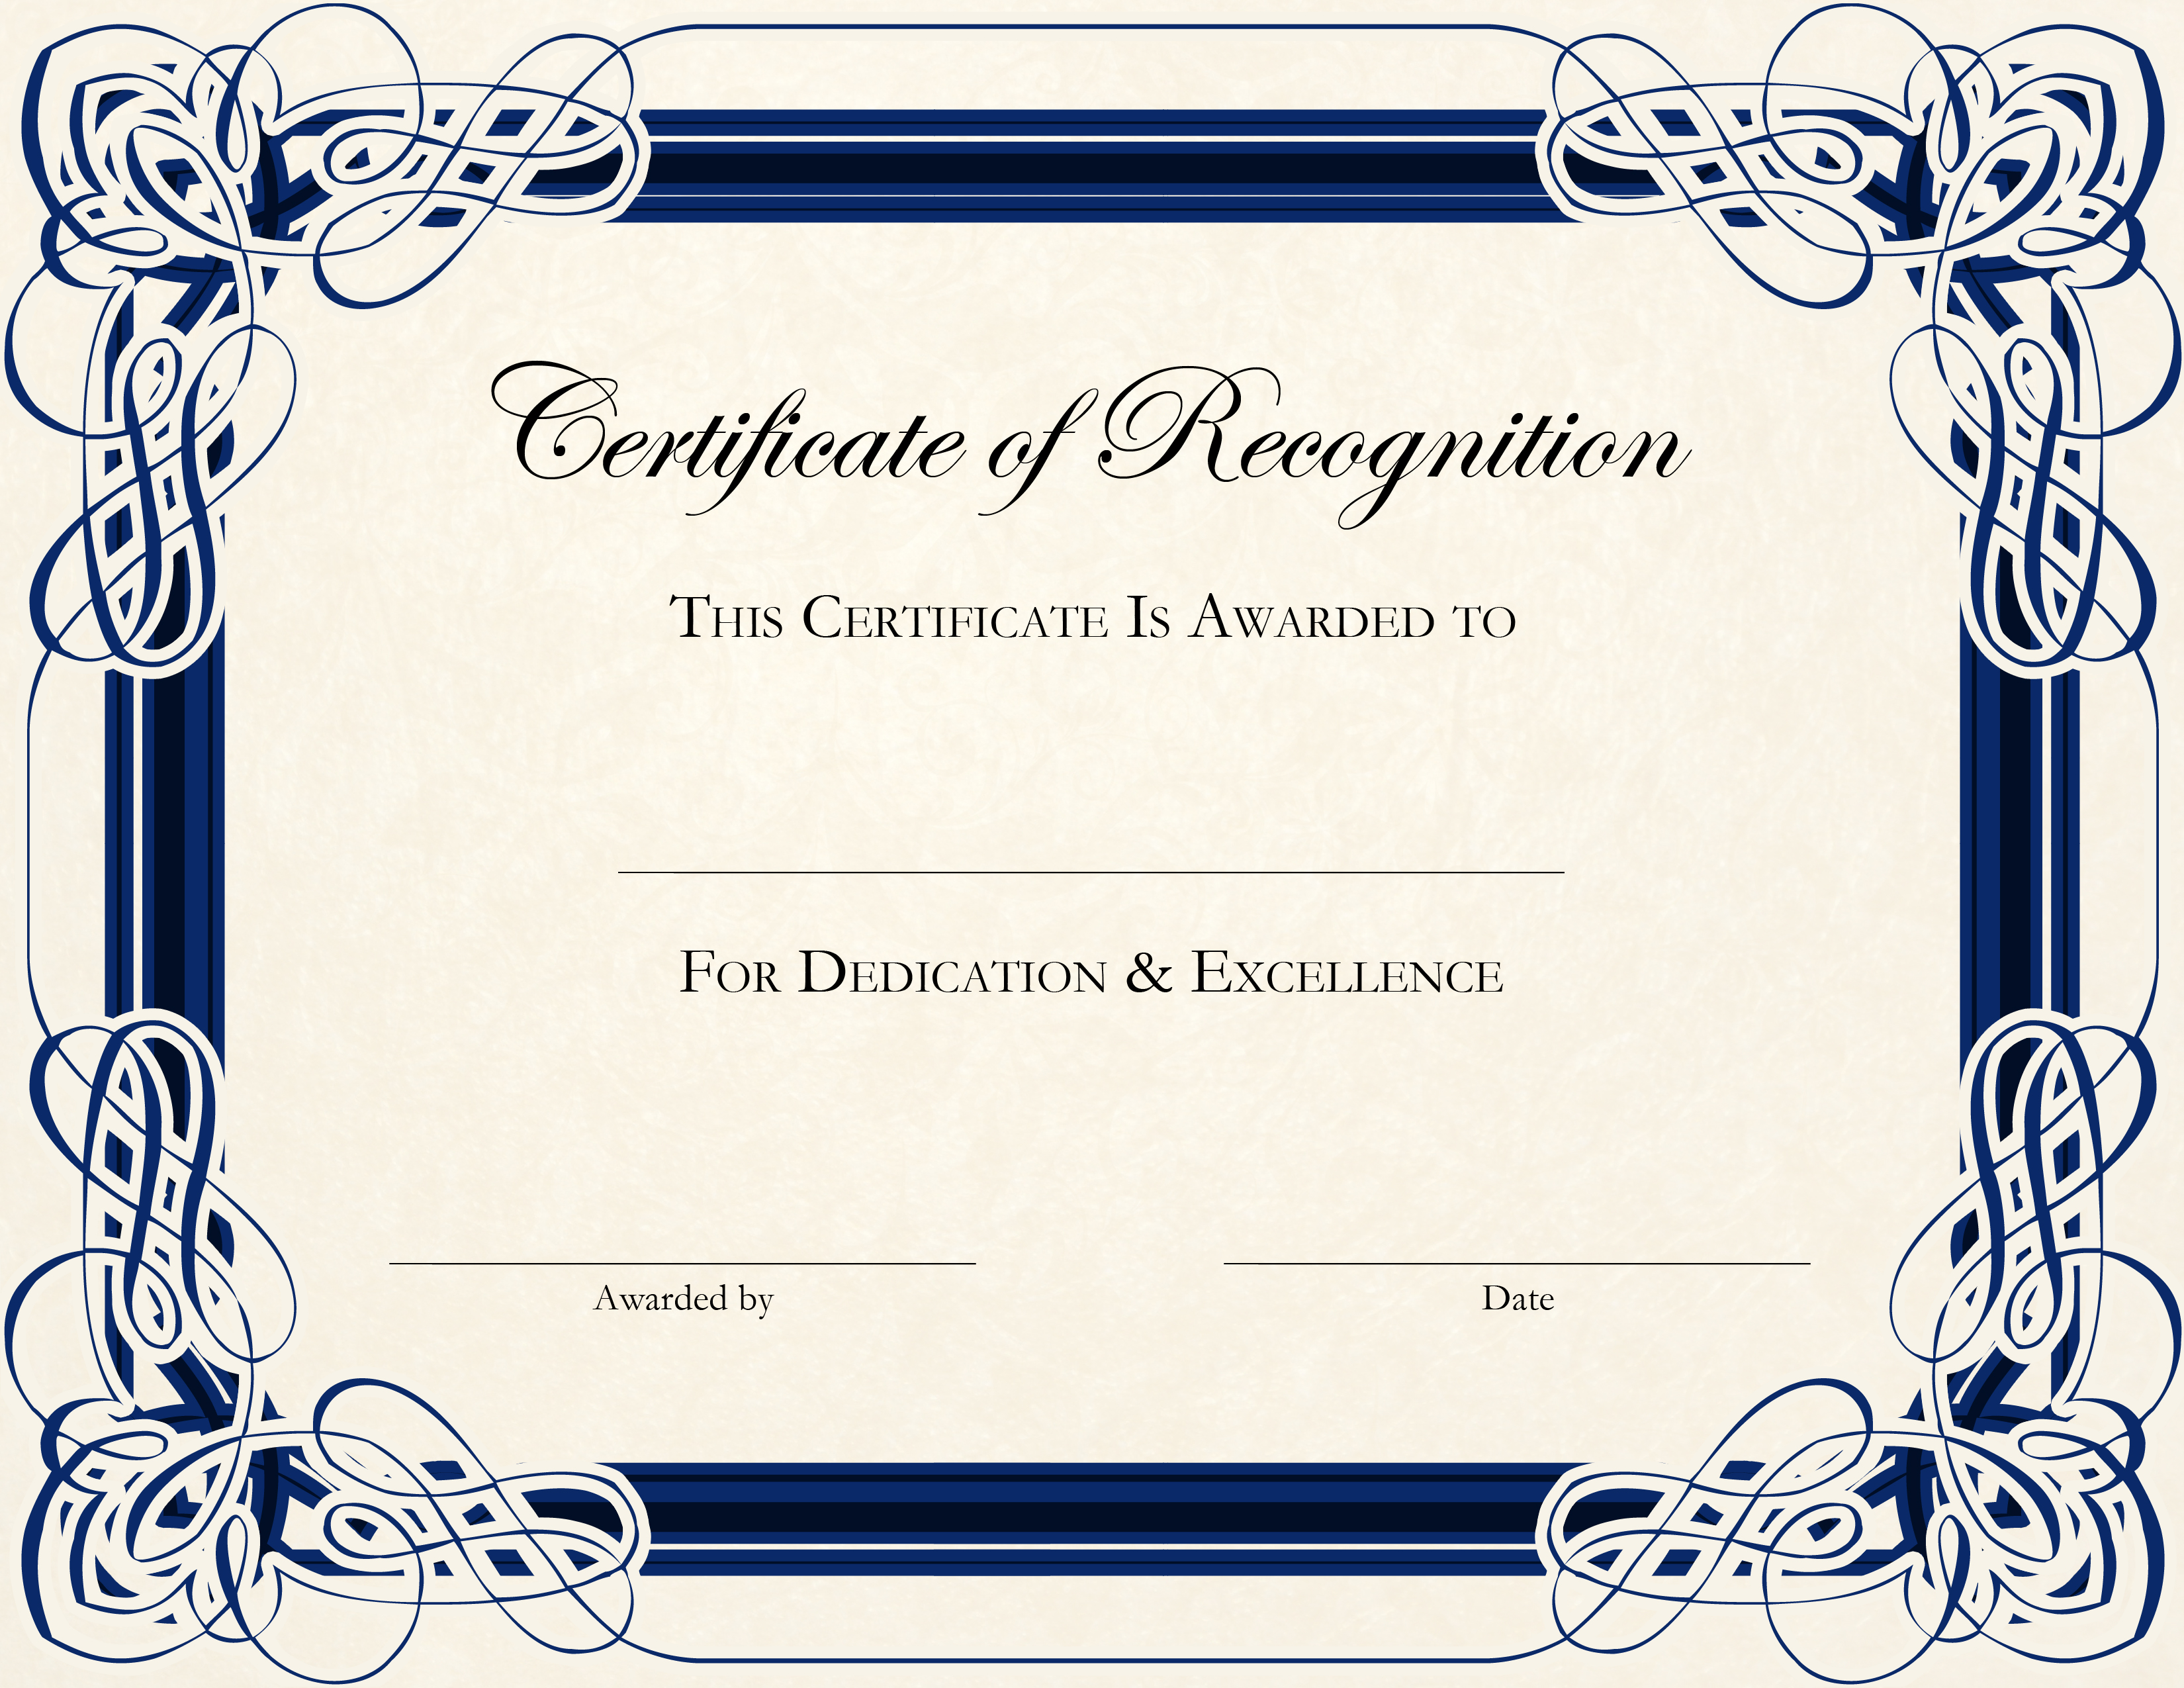 21 Editable Microsoft Certificate Templates Images - Free Editable Throughout Certificate Of Participation Template Word